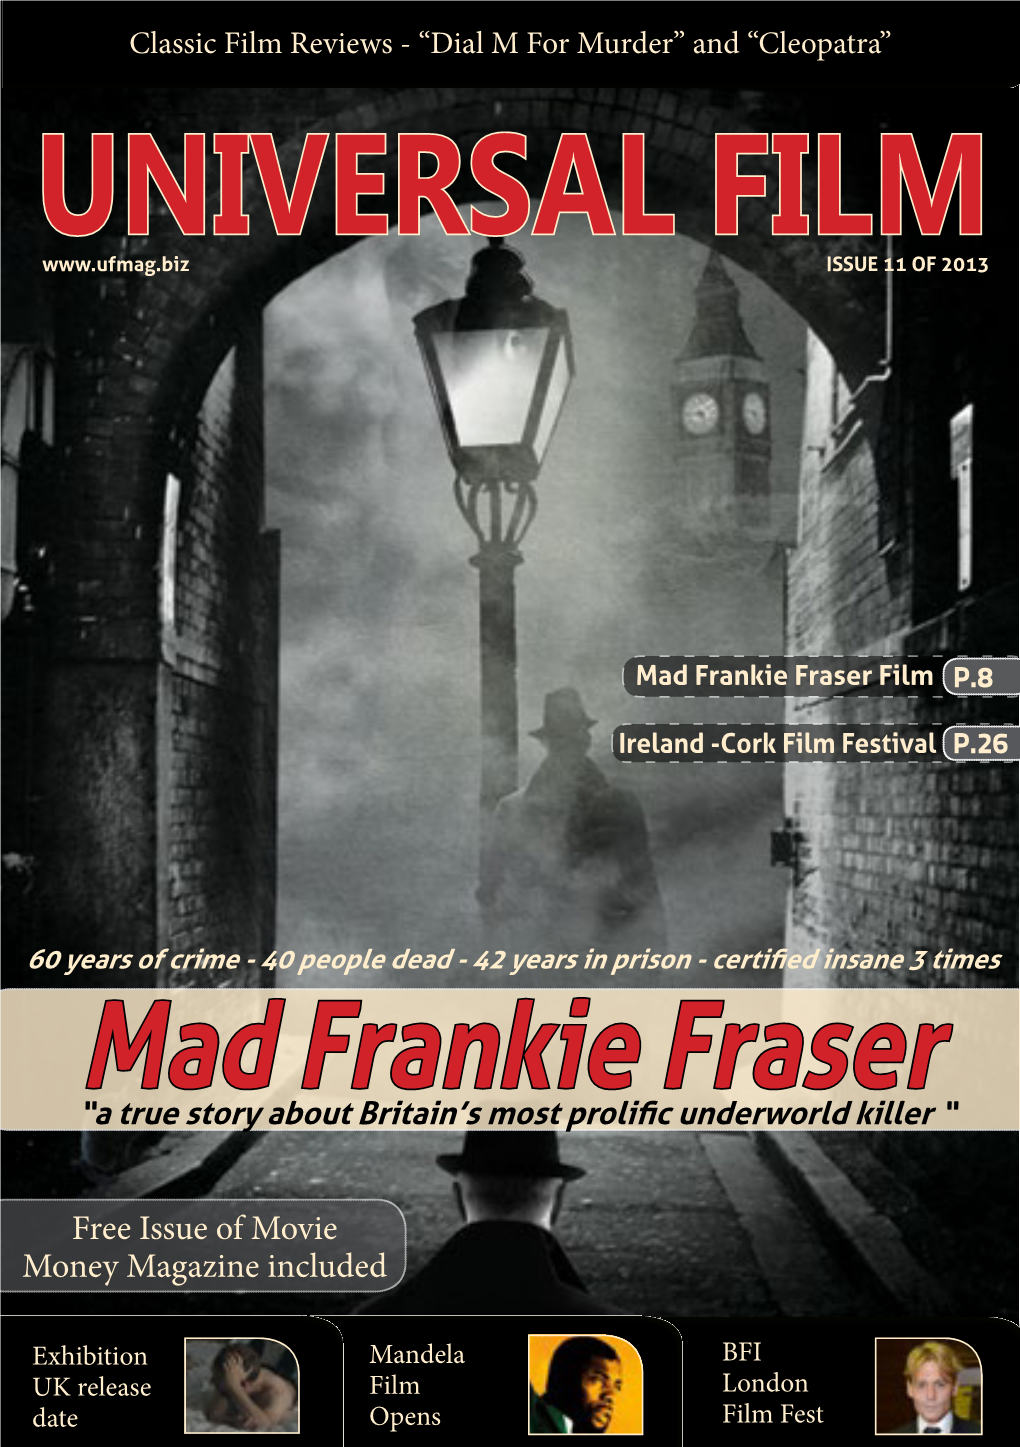 Universal Film Issue 11 - 2013 About Universal